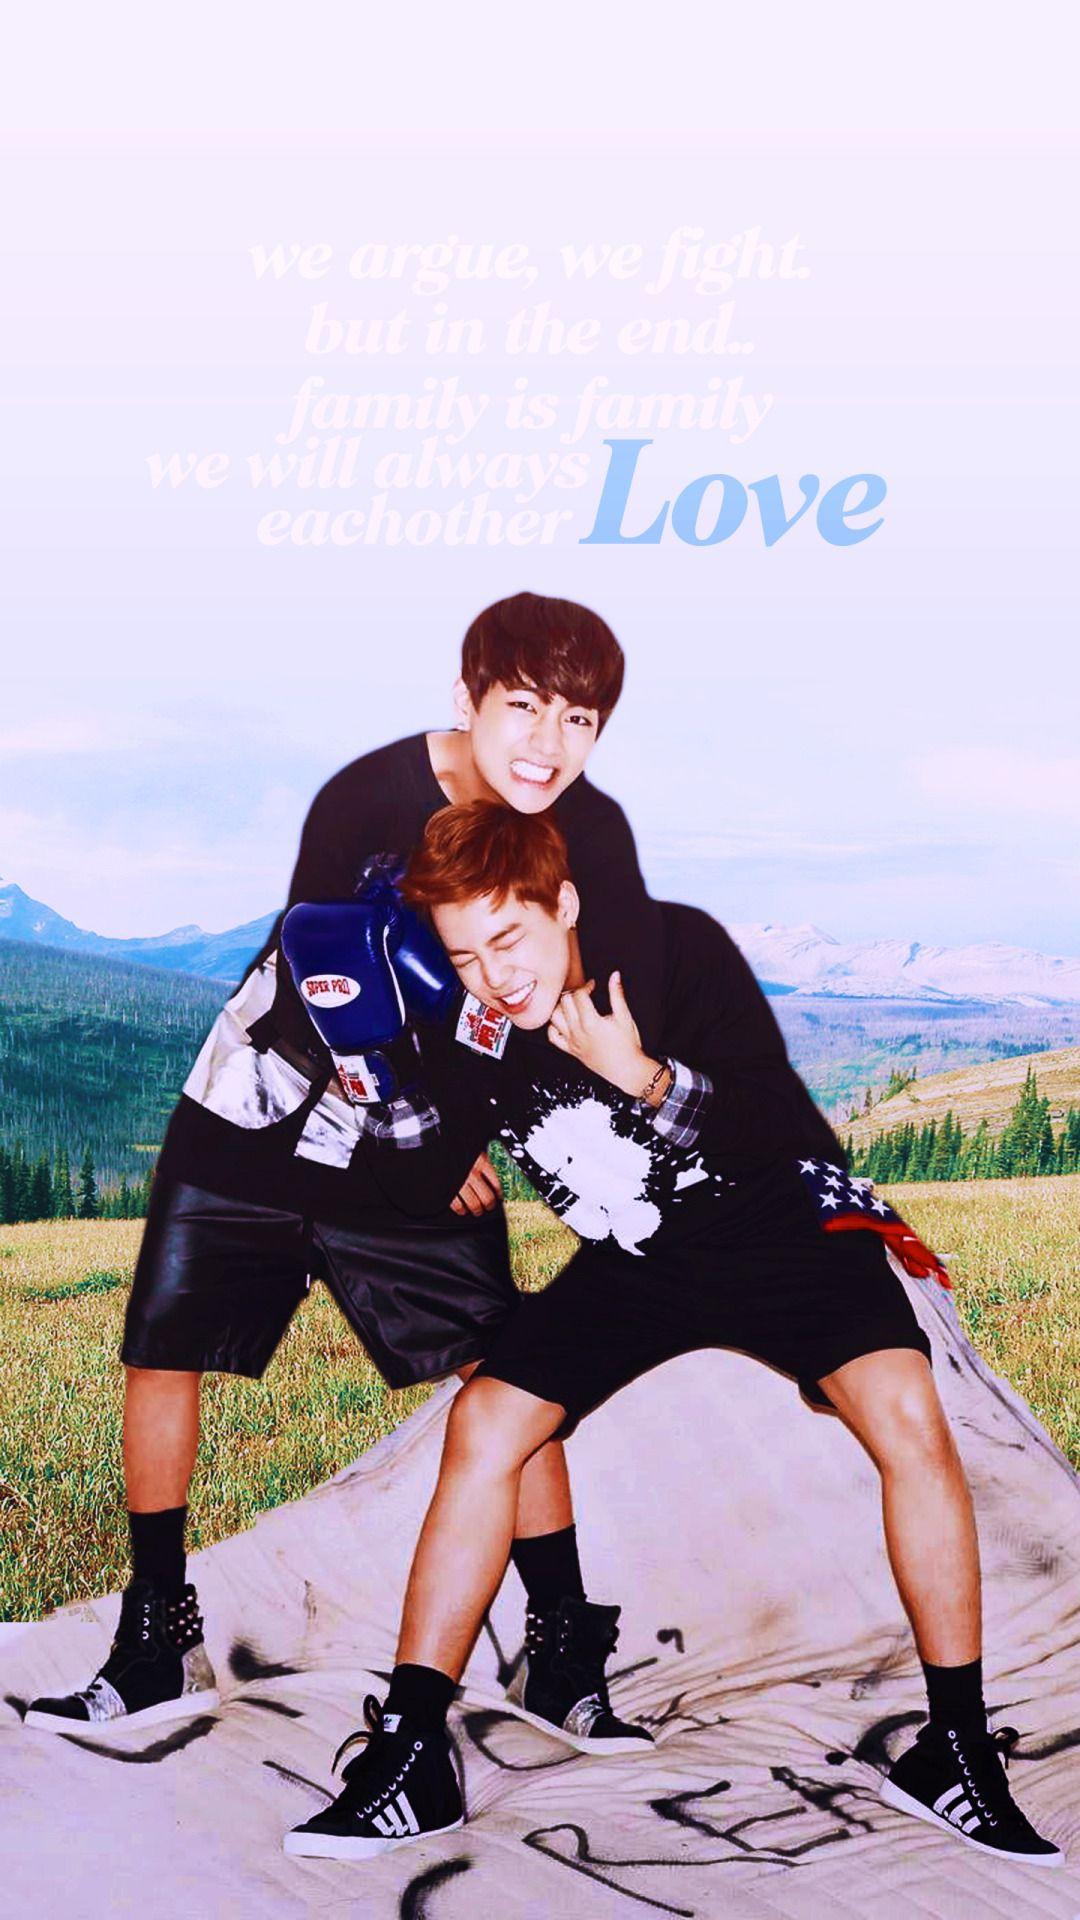 Vmin Phone Wallpaper Requested by: Anonymous